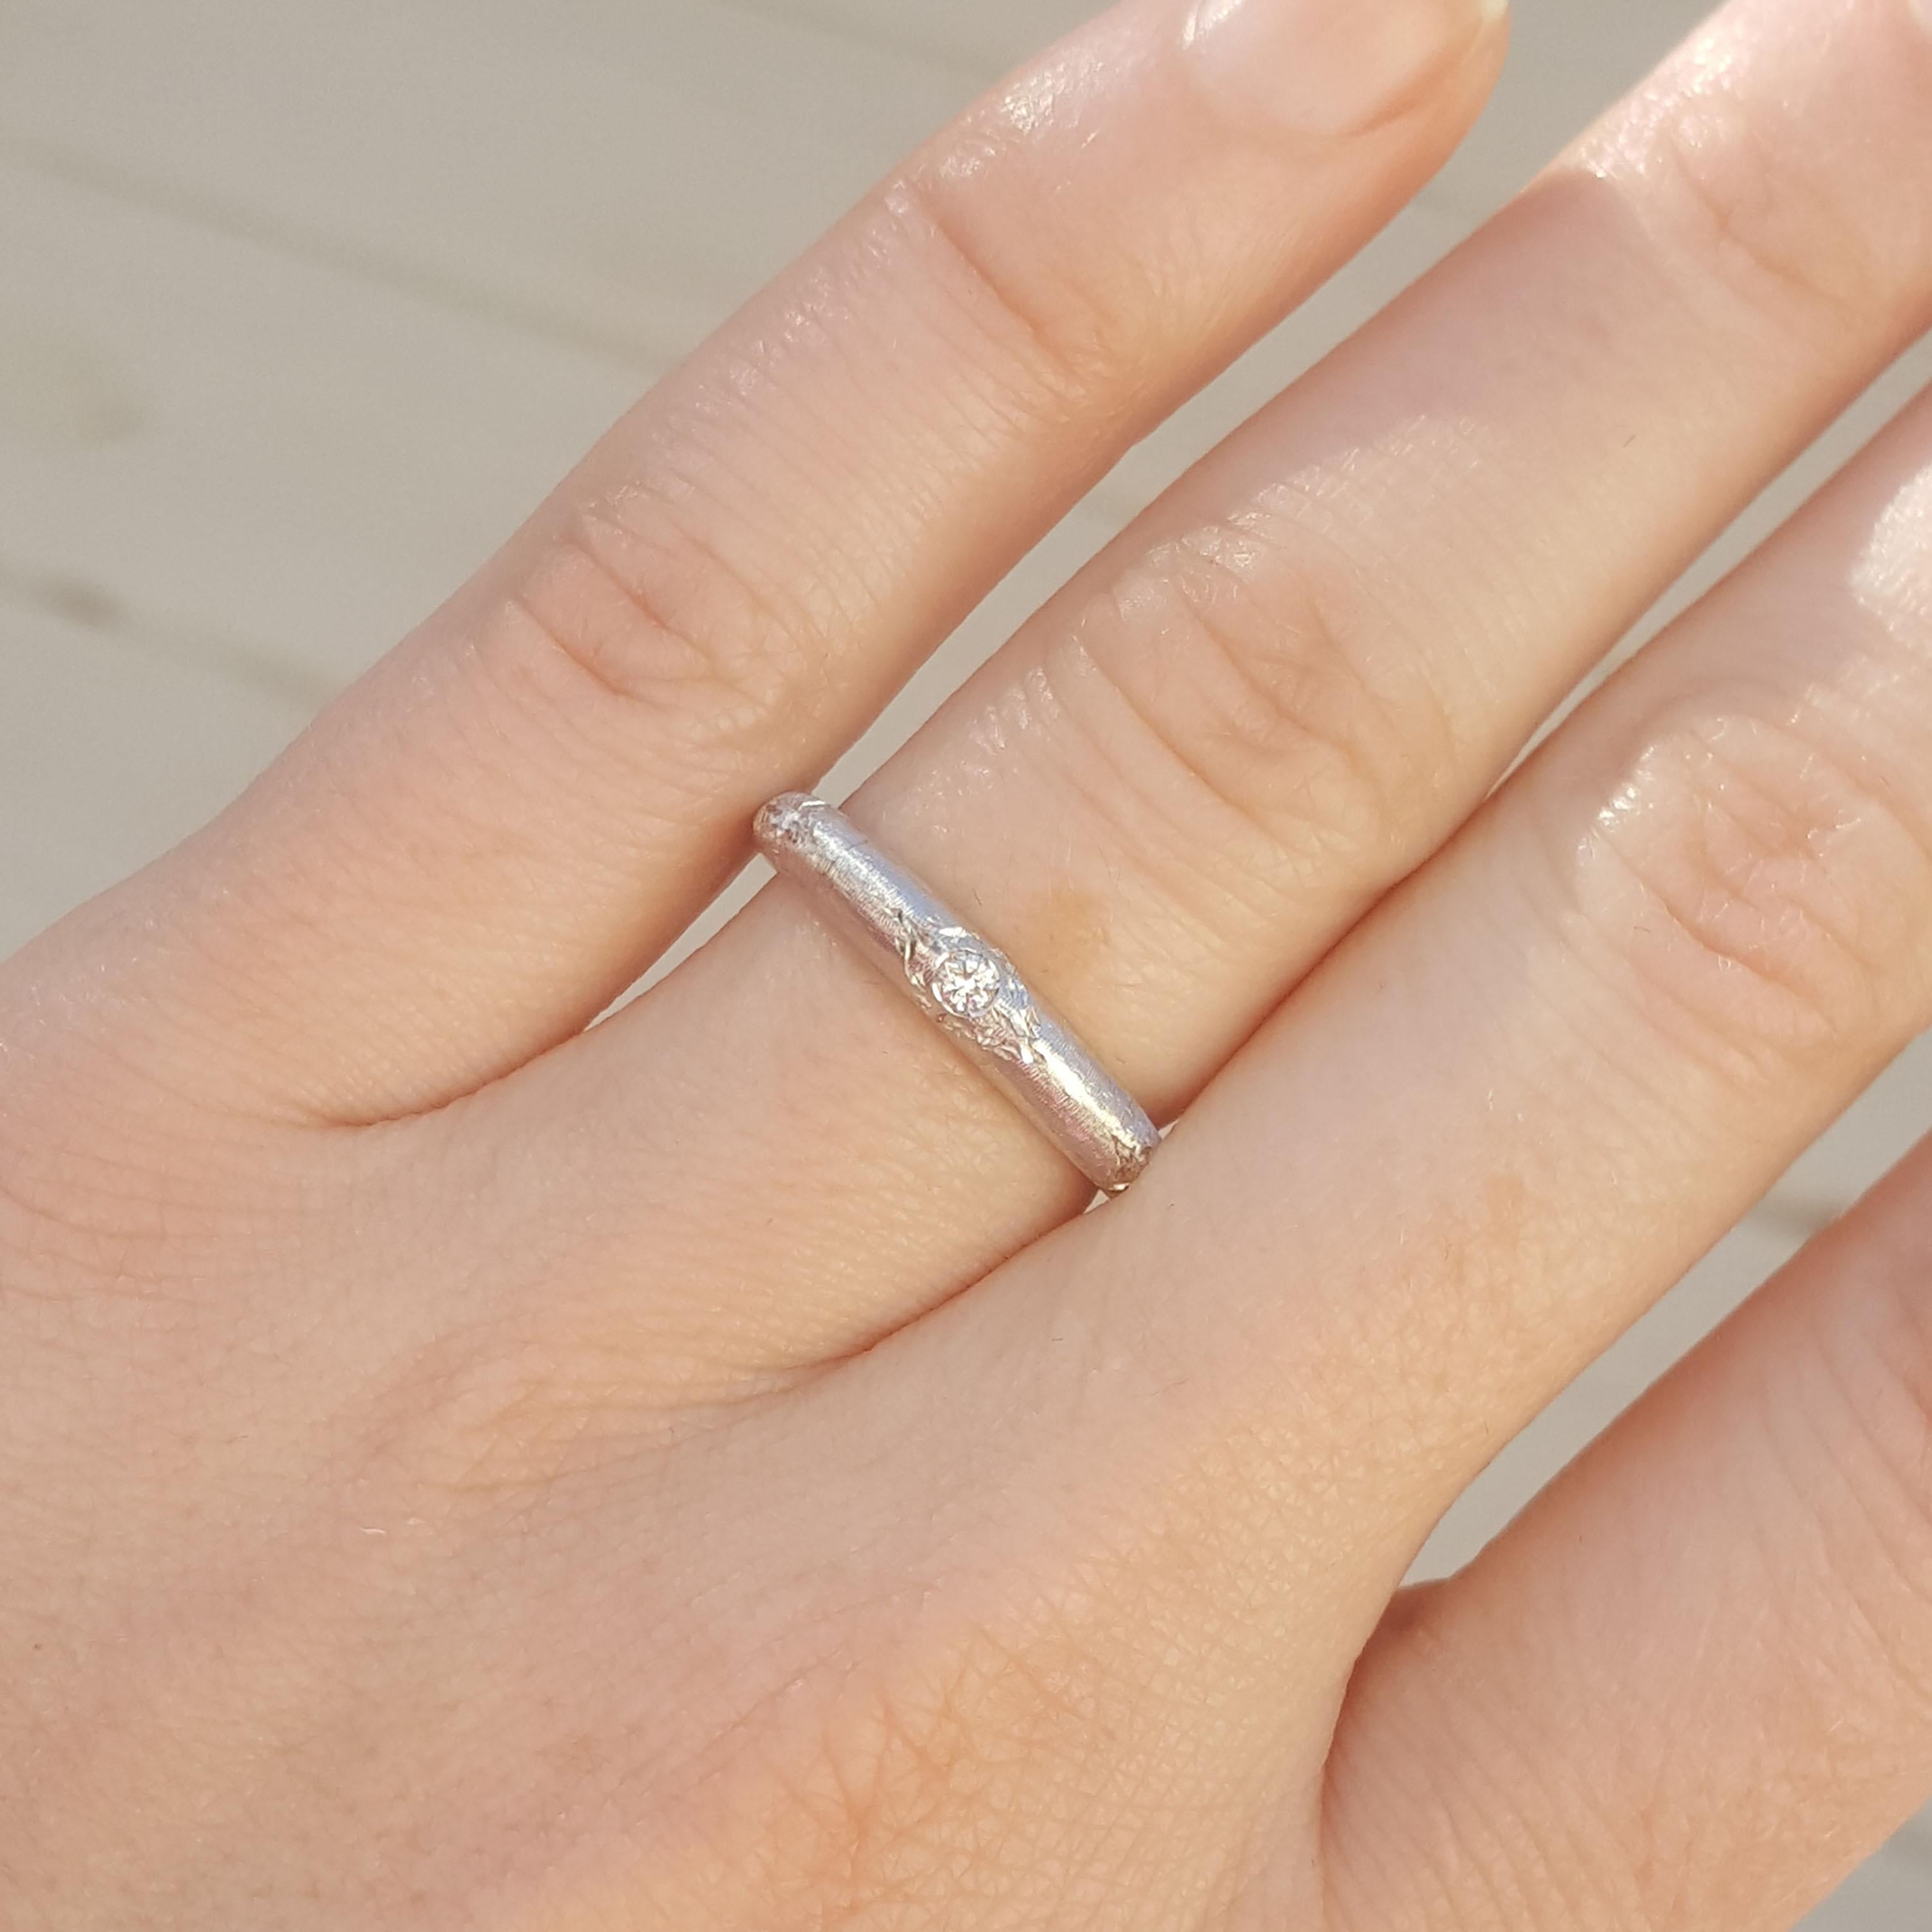 The Piccoli band is charming and delicate, a sweet homage to the sumptuous Florentine style in a wearable and modern style. The single diamond gleams in the richly textured 18kt surface. 

This particular version of this ring is graduated for